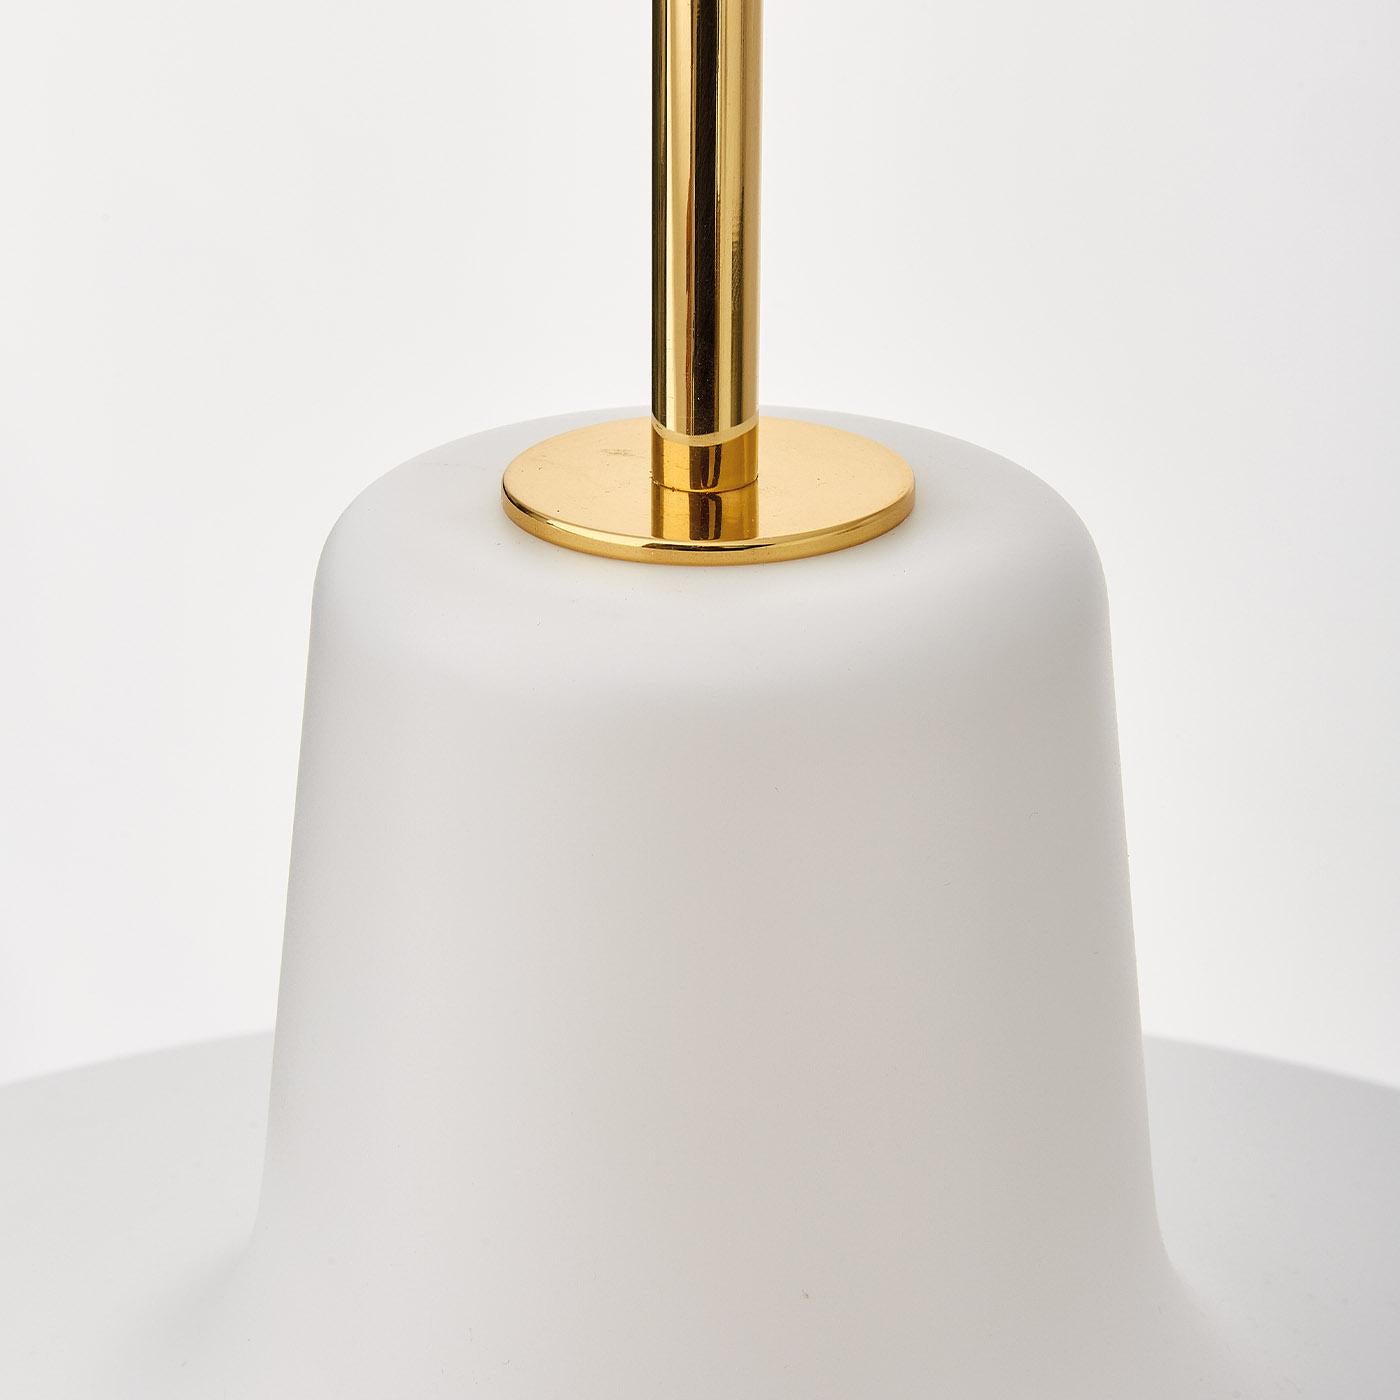 An iconic design first created in 1958 by Ignazio Gardella for the Edizioni Paoline bookshops, this pendant lamp boasts a lightweight and simple shape, made of satin white-lacquered polycarbonate and polished brass details.